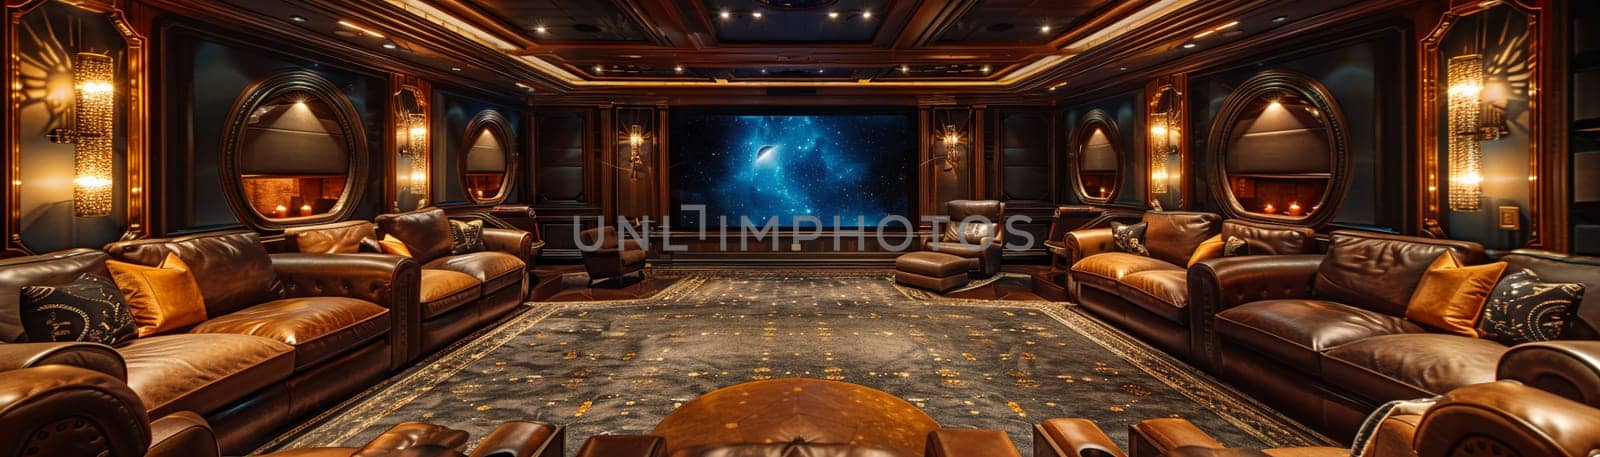 Luxurious home theater with plush seating and state-of-the-art sound systemup32K HD